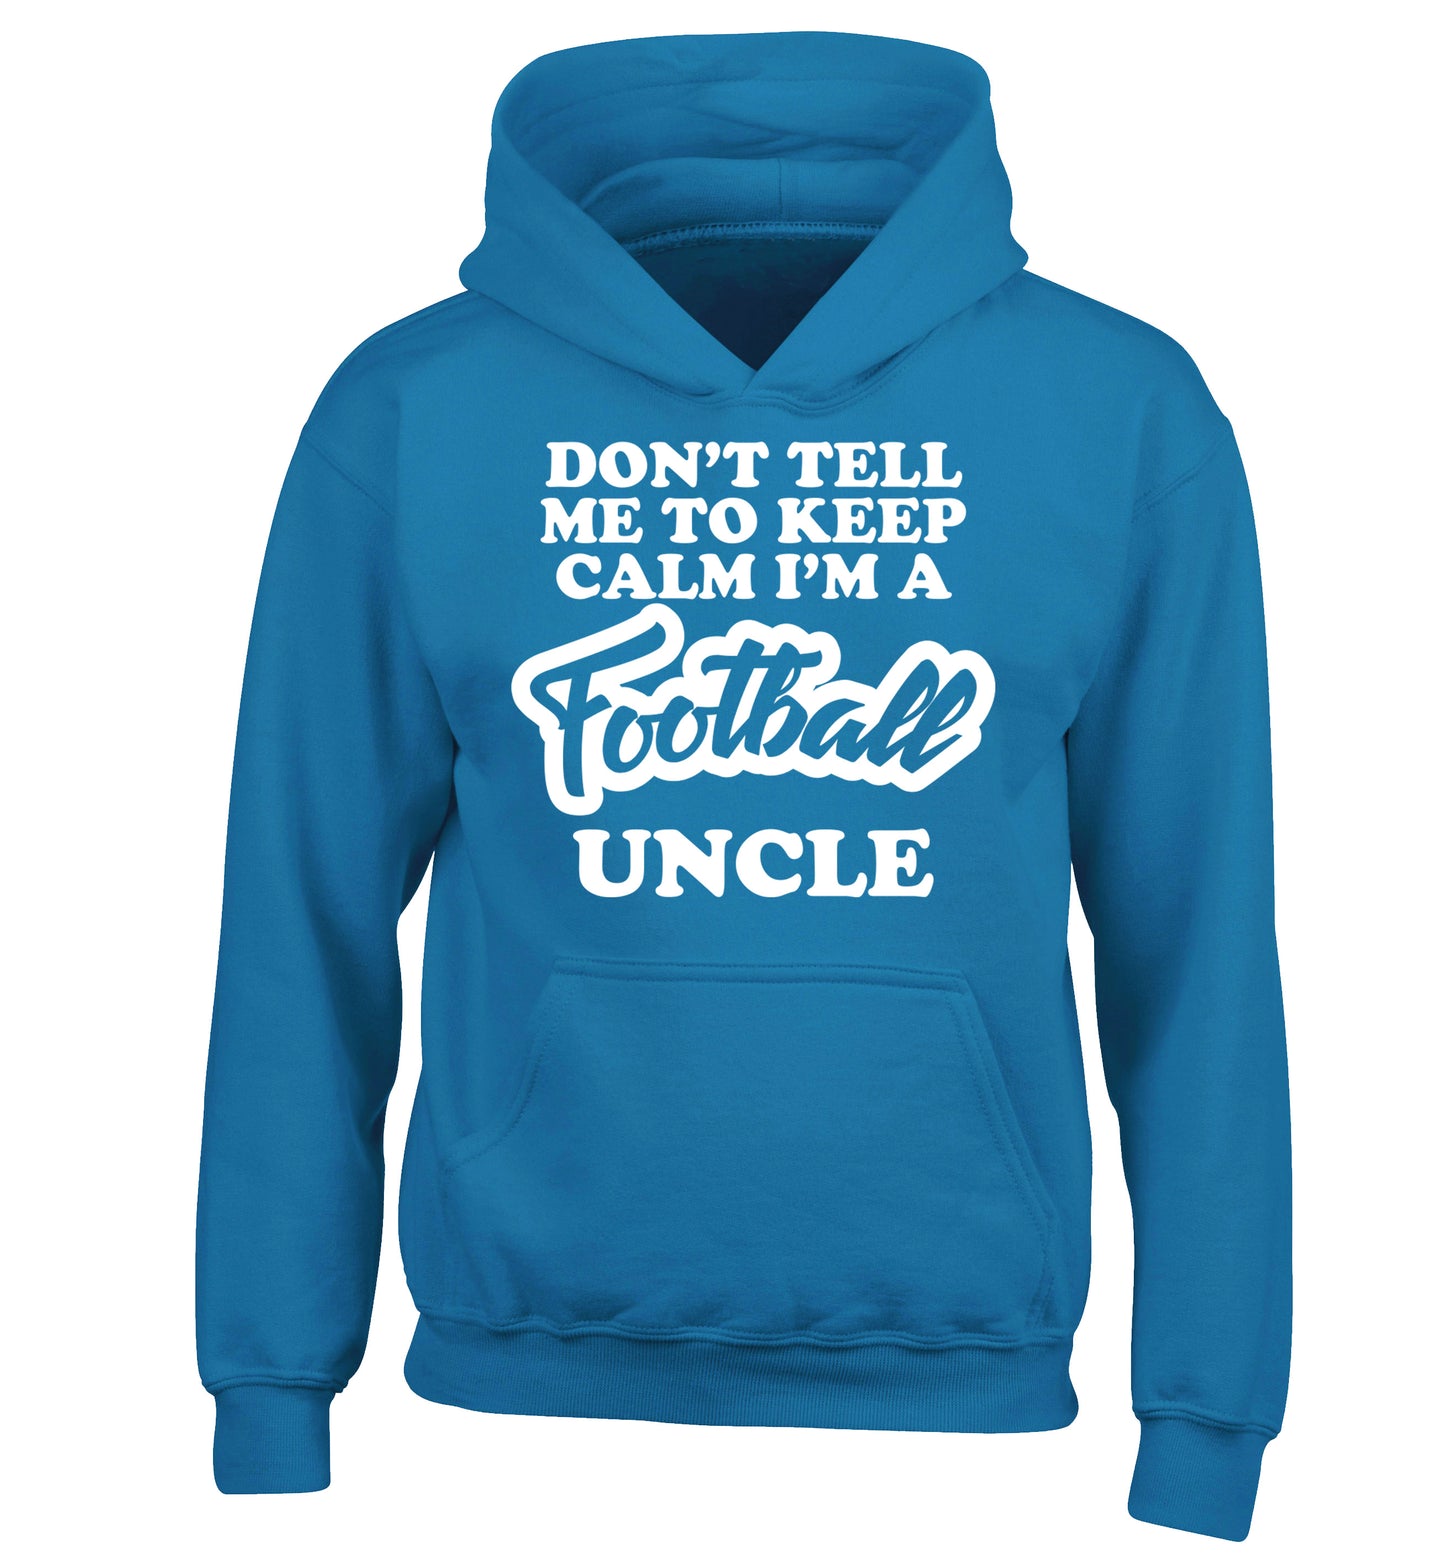 Don't tell me to keep calm I'm a football uncle children's blue hoodie 12-14 Years